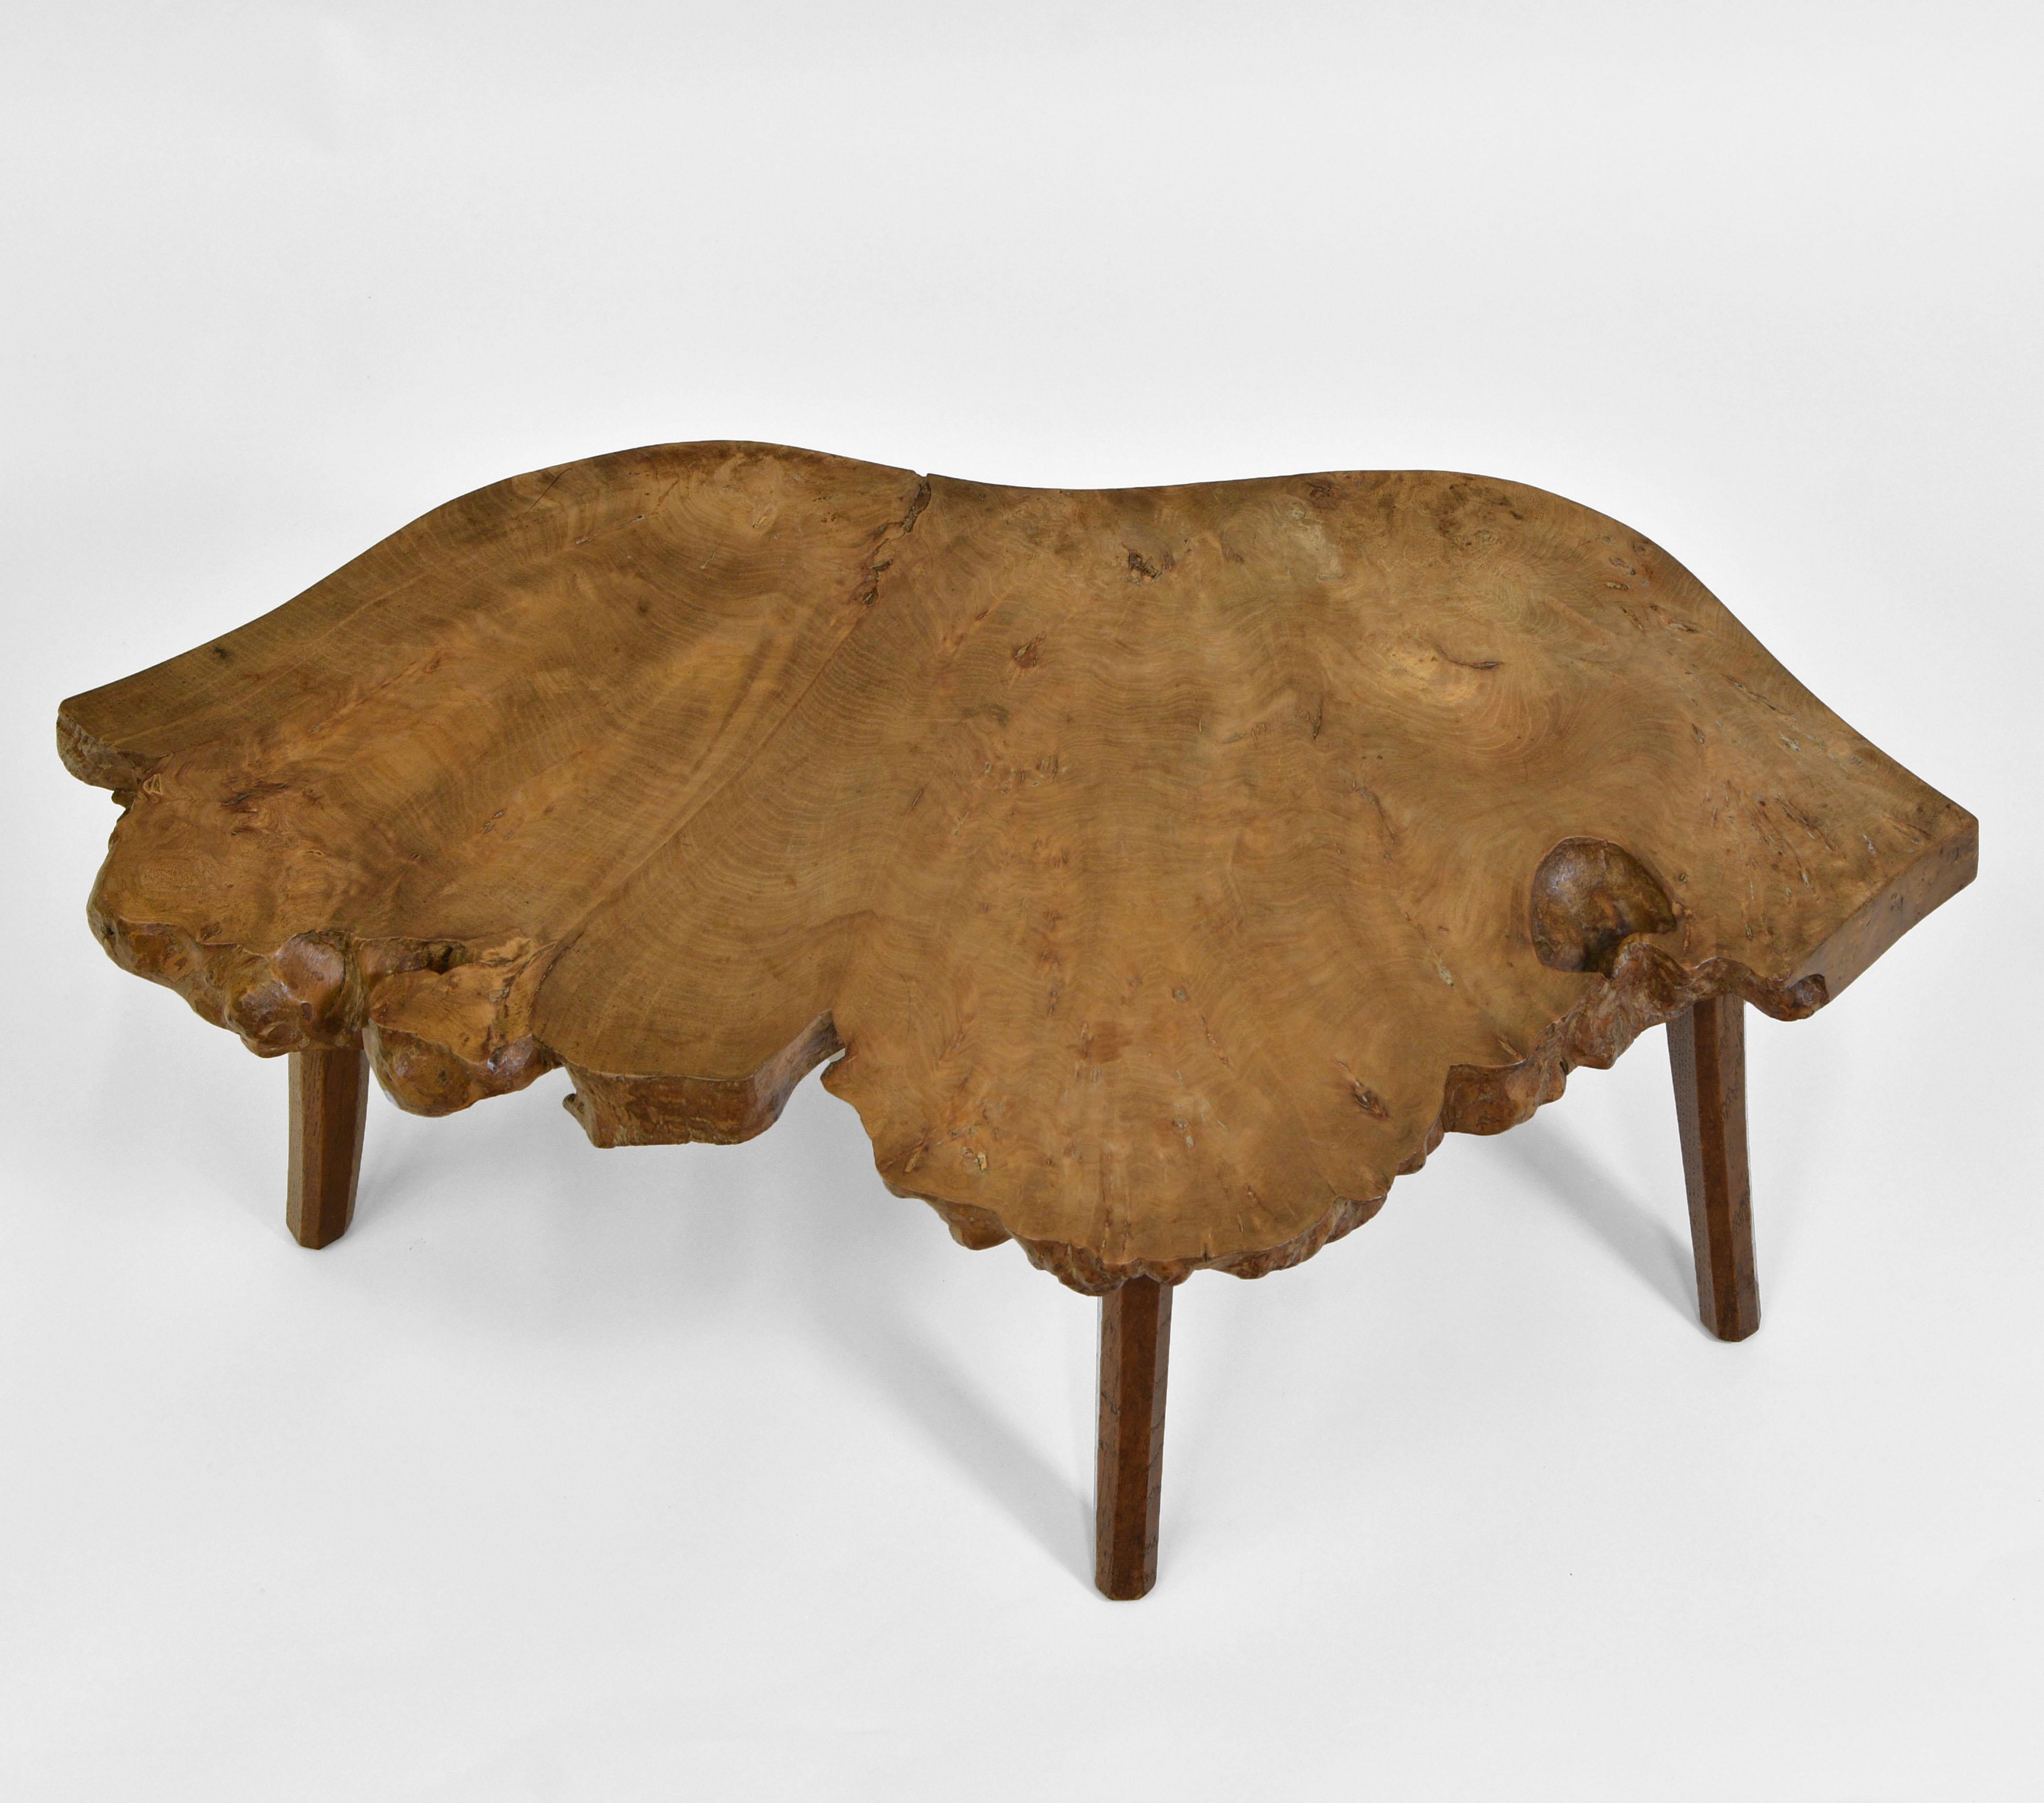 Hand-Crafted Unique Mid-Century Sculptural Burr Elm Coffee Table by Jack Grimble England 1965